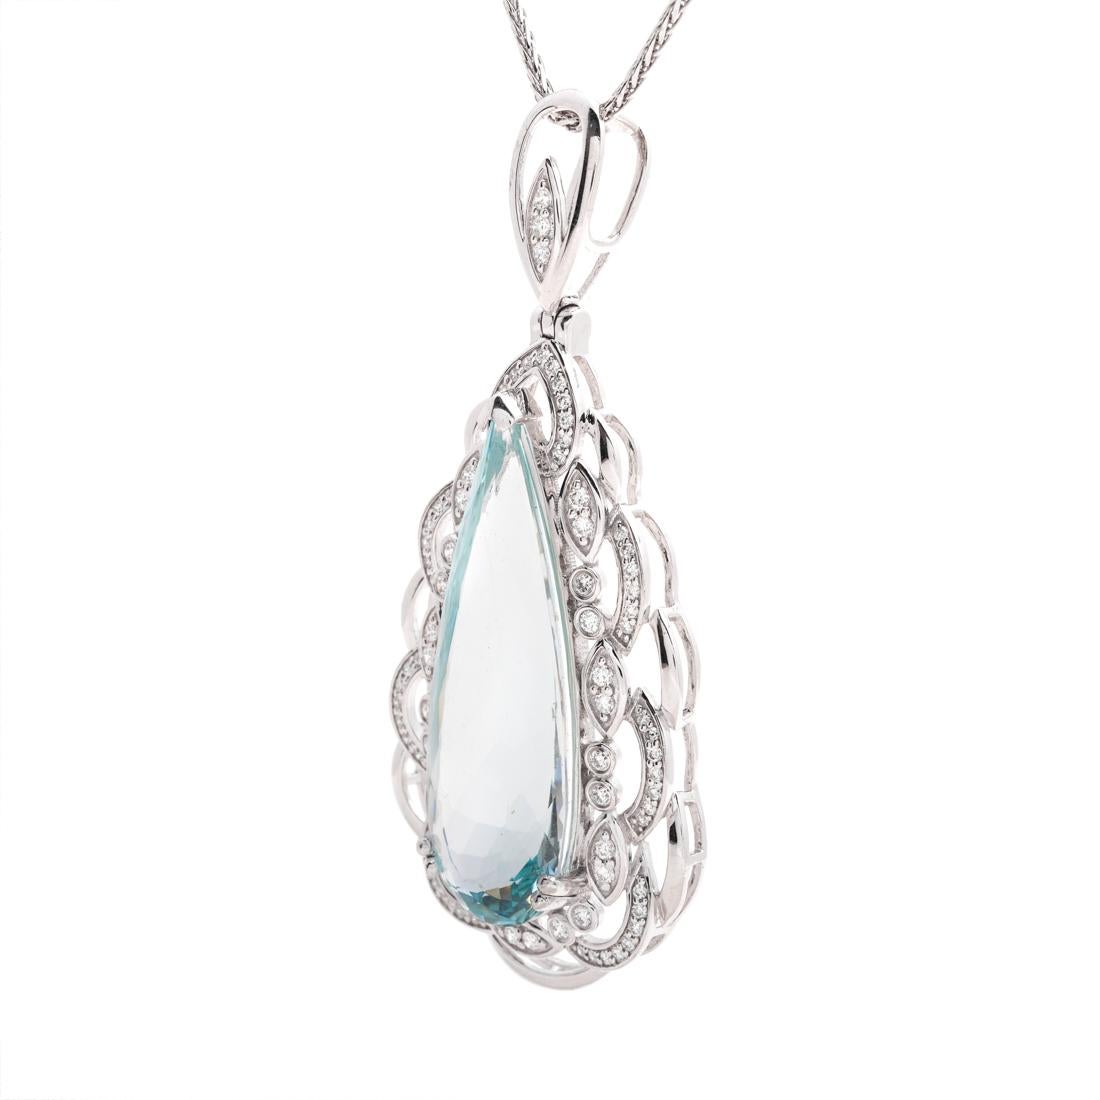 Platinum Aquamarine and Diamond Pendant Necklace
Aquamarine weighing approx. 17.80 cts
Set within a scalloped diamond bezel, completed by a stylized diamond accented bail
Supported by a platinum chain
Accompanied with AIG paperwork